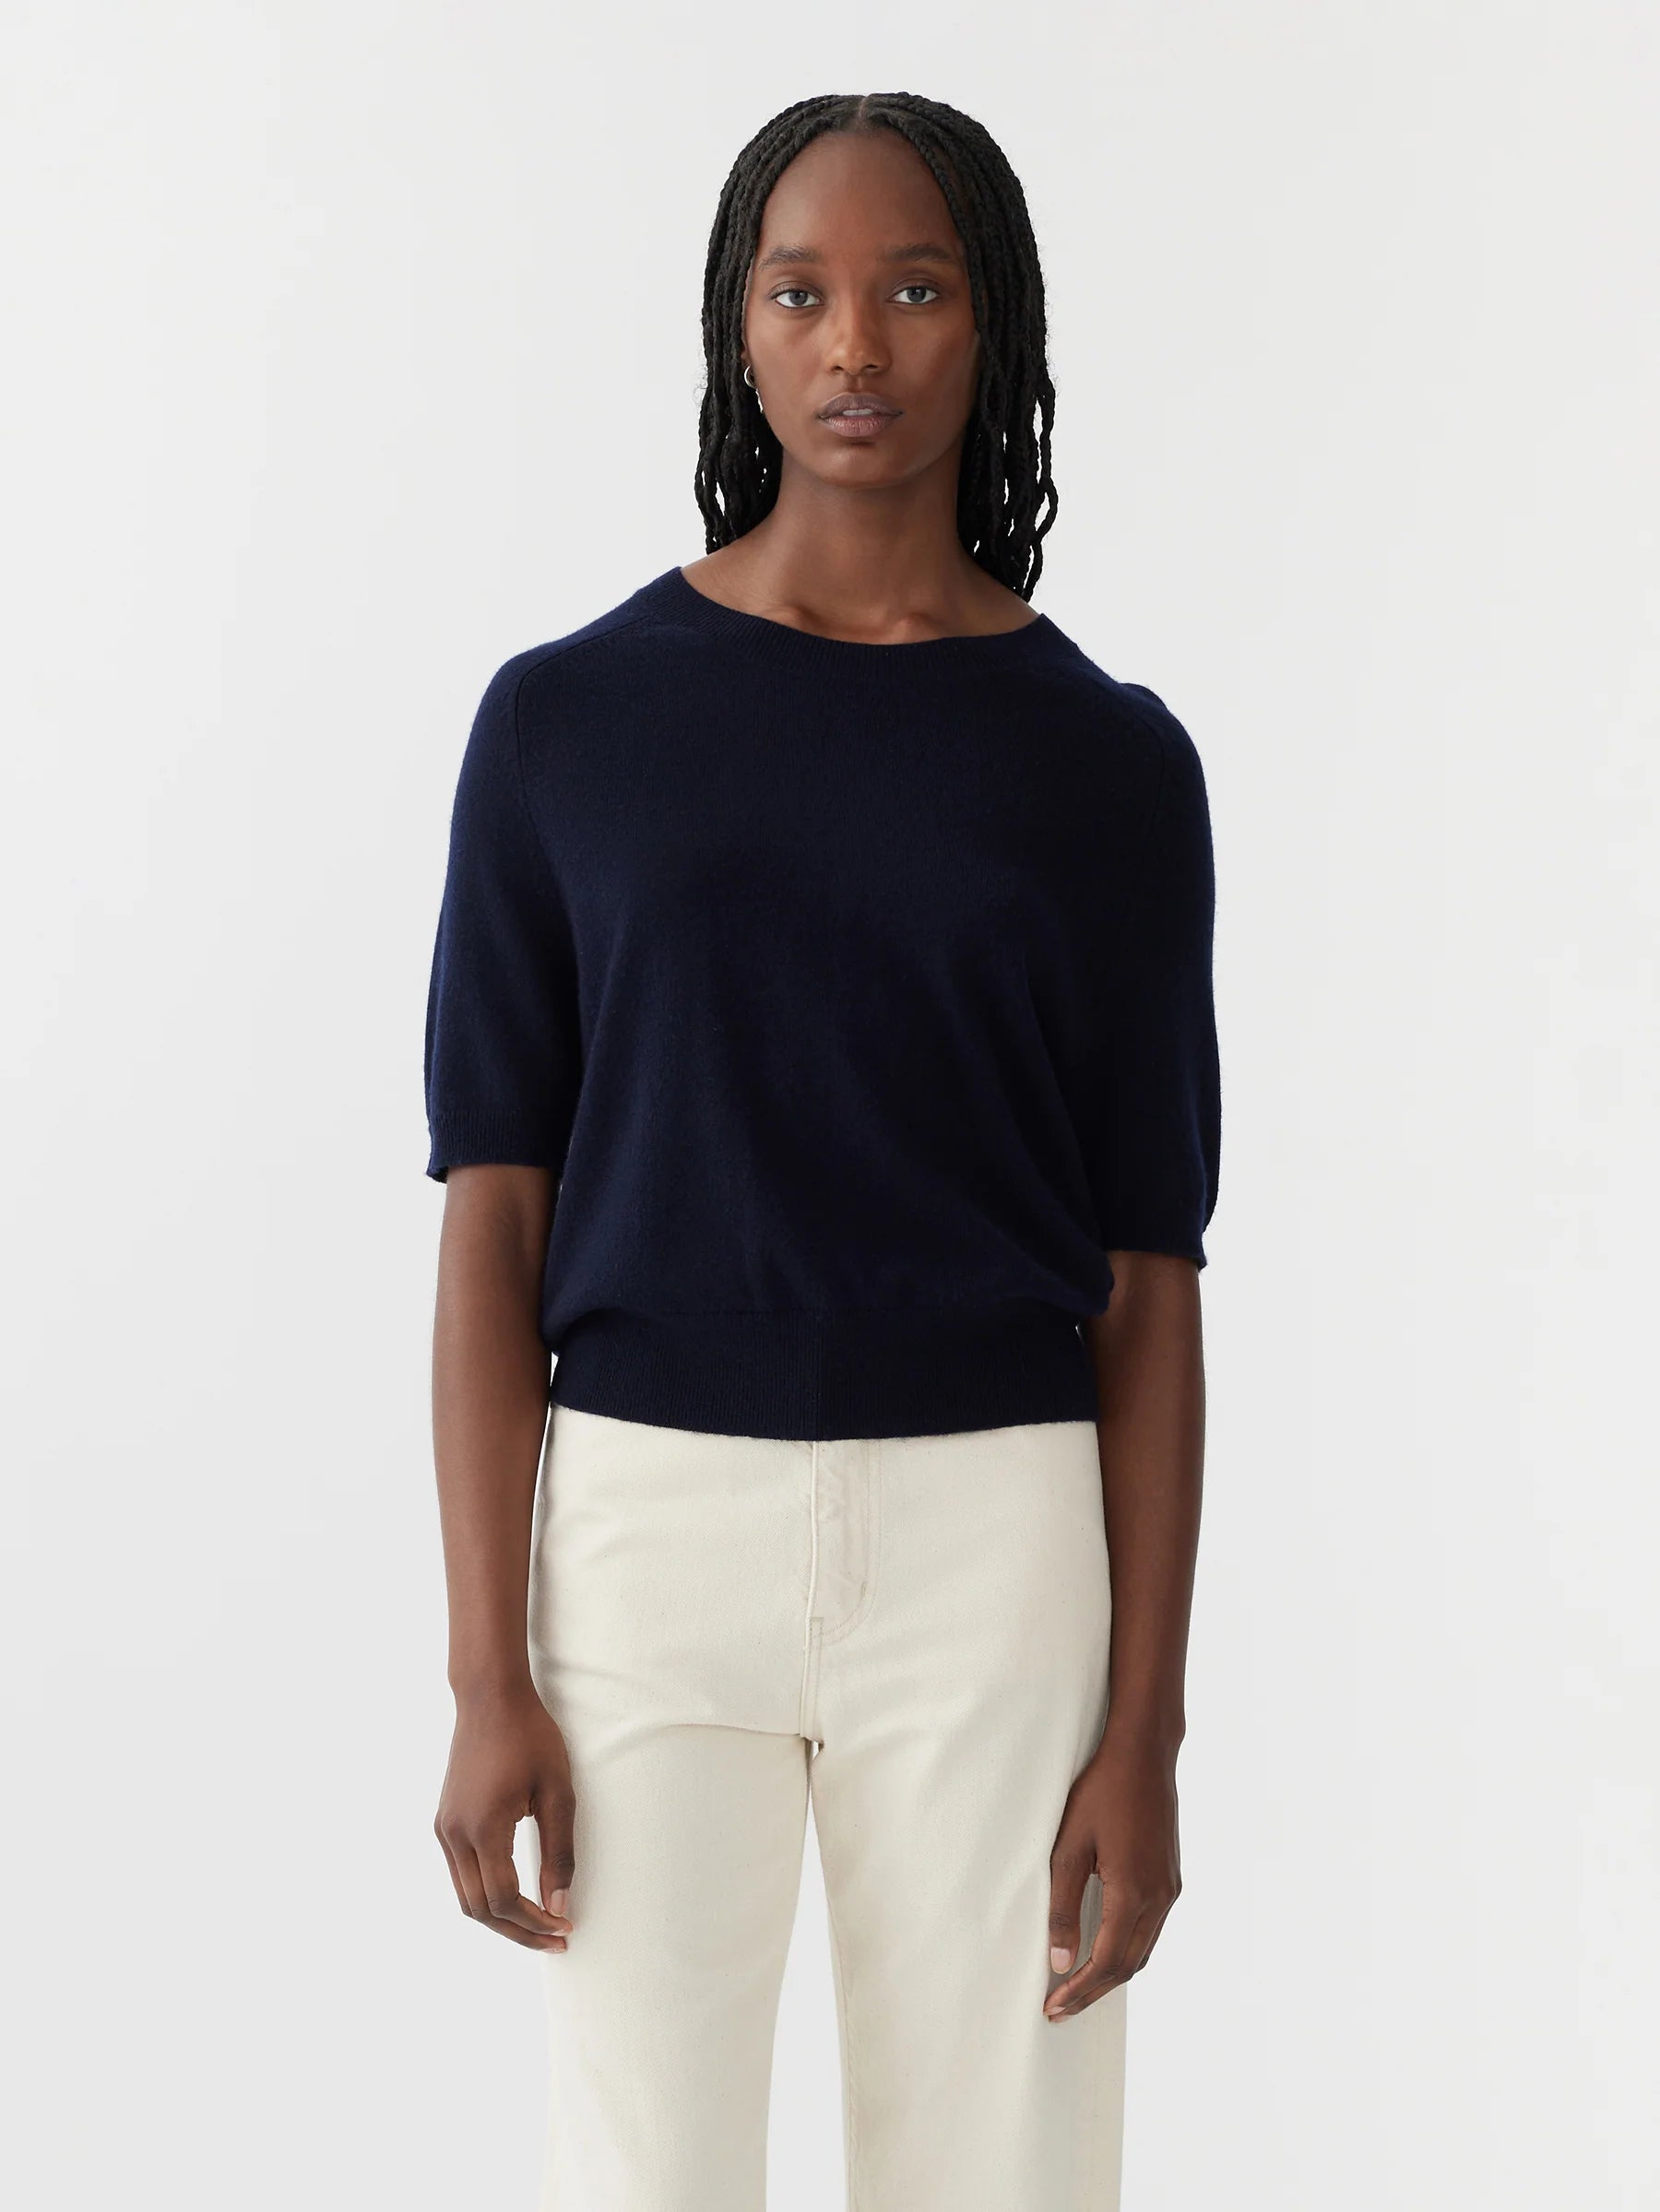 Wool Cashmere T-shirt Knit by Bassike